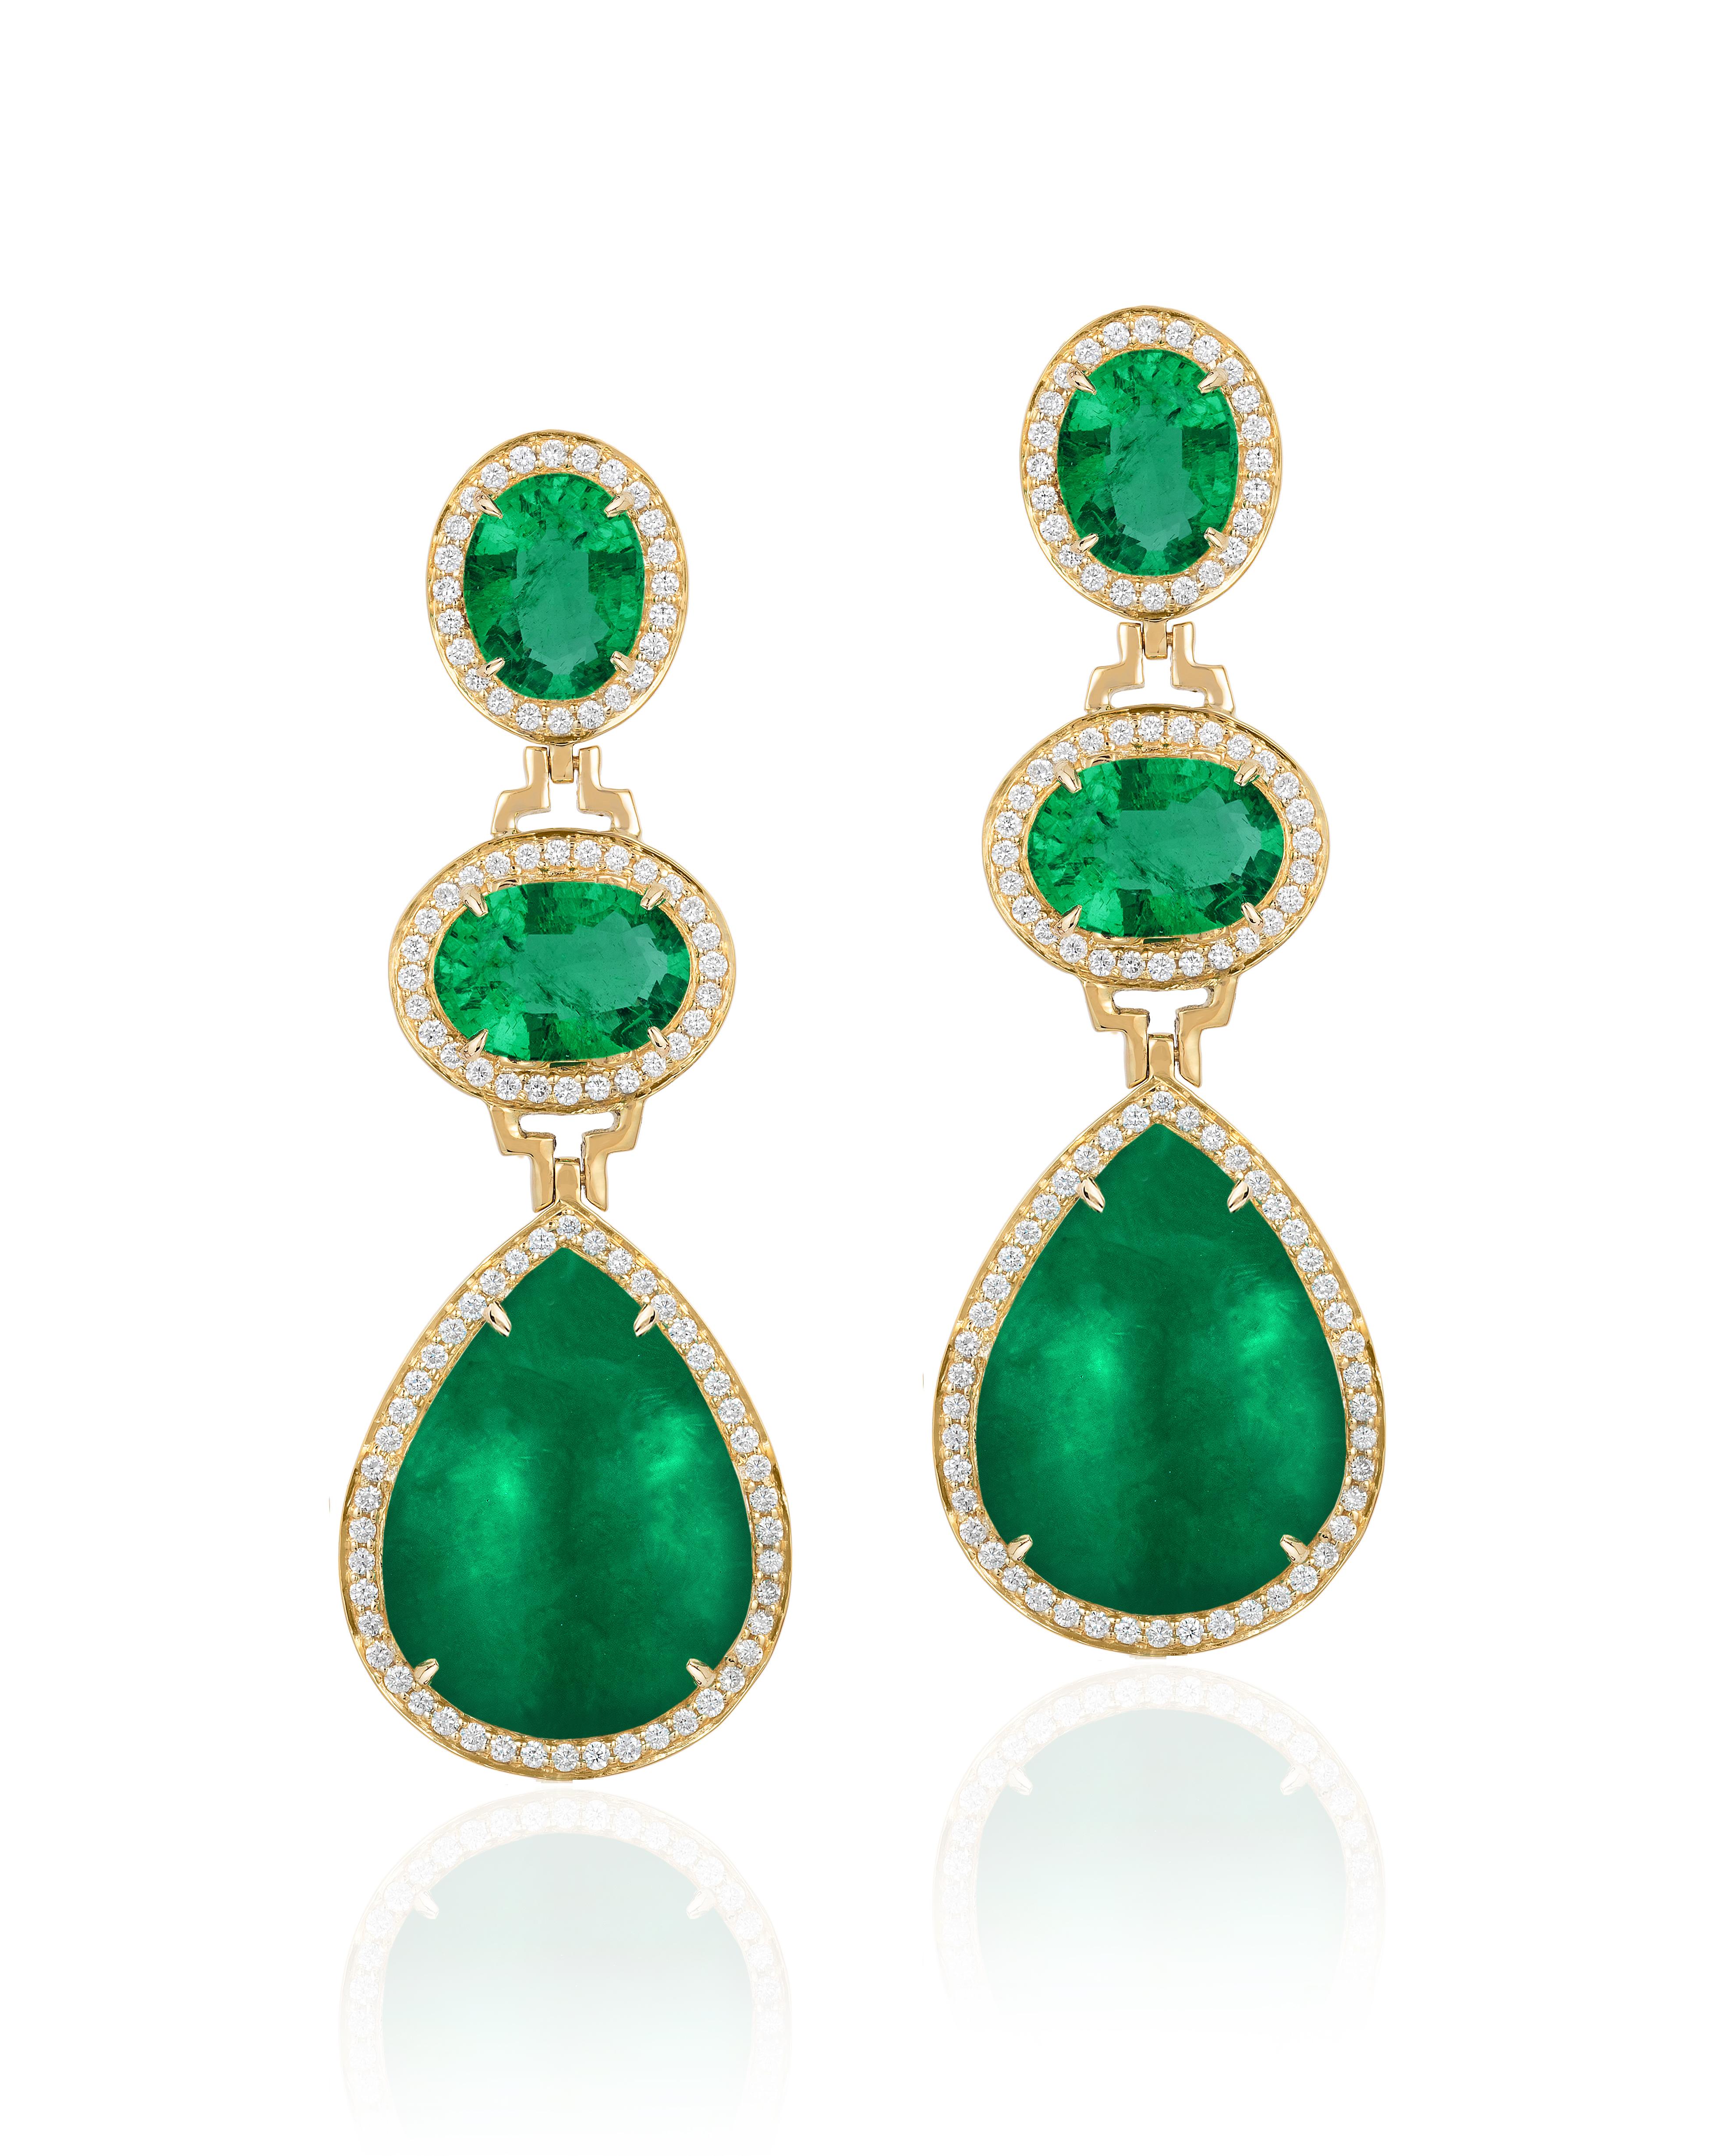 Contemporary Goshwara 3 Tier Faceted Oval and Pear Shape Emerald Drop Earrings  For Sale